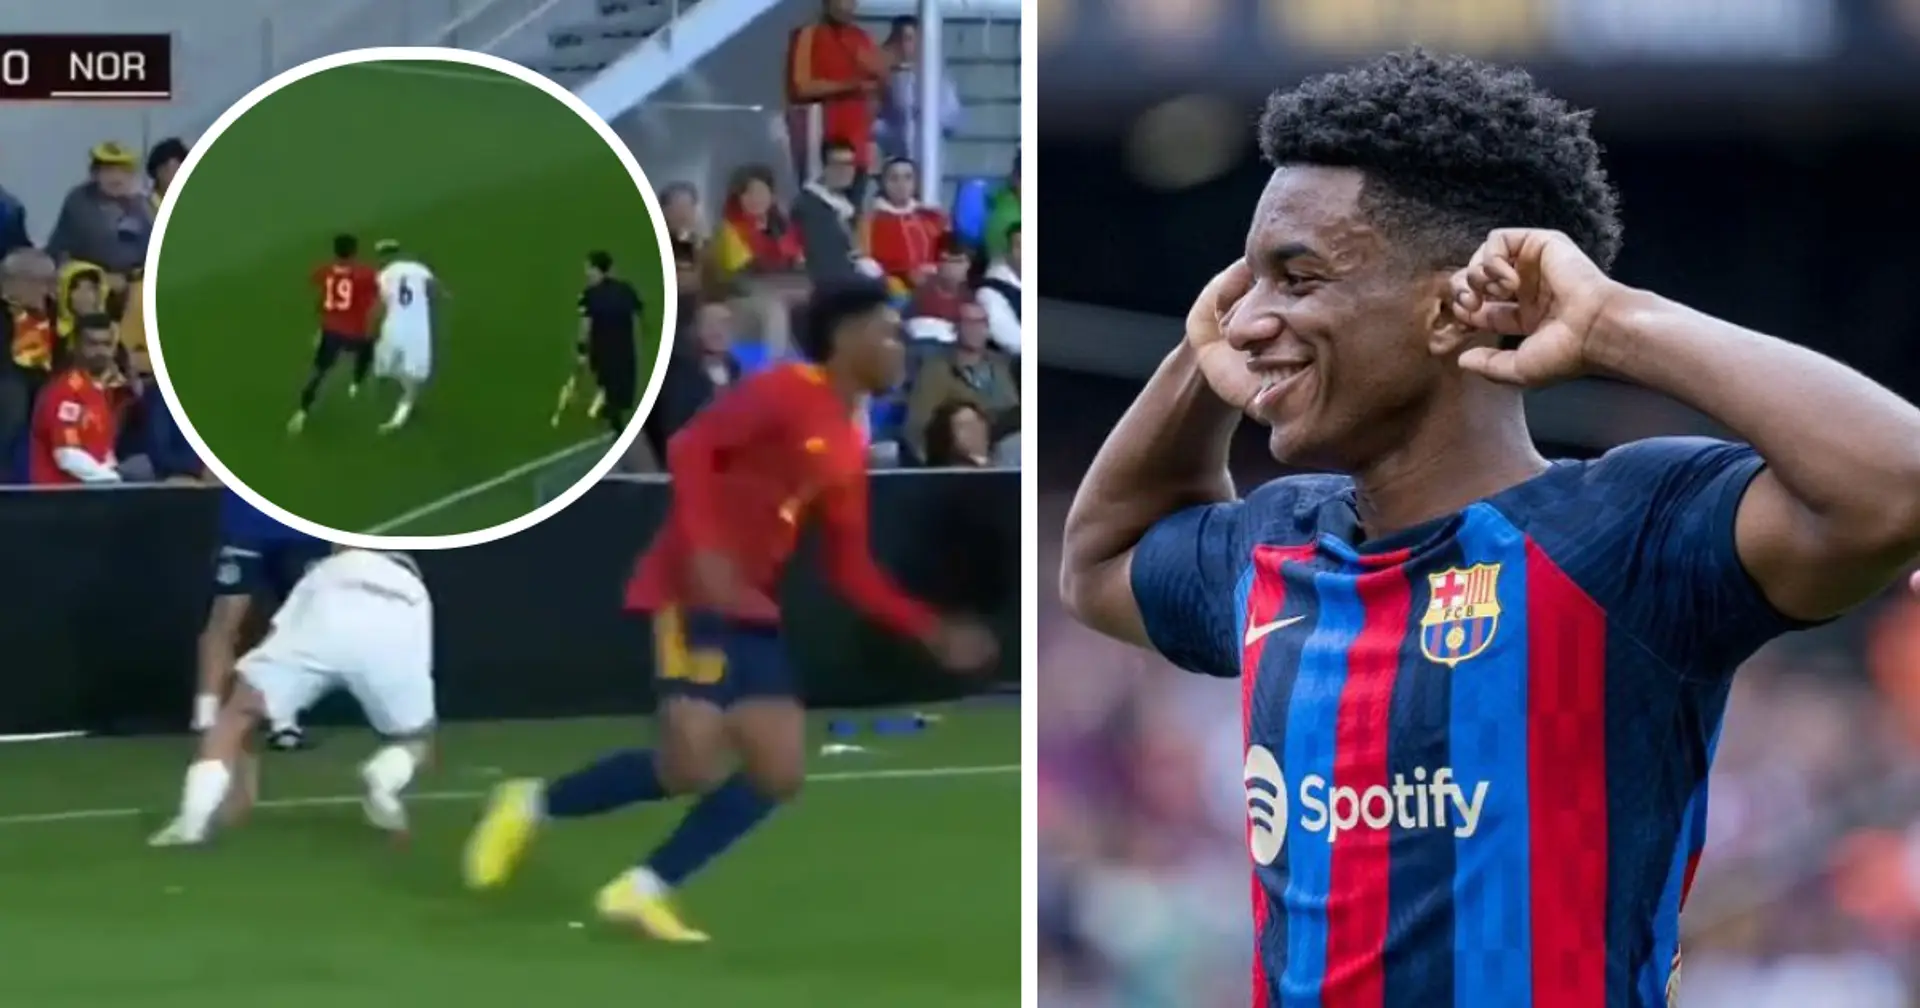 'He can be a monster' - Balde spotted showing incredible speed v Norway U21